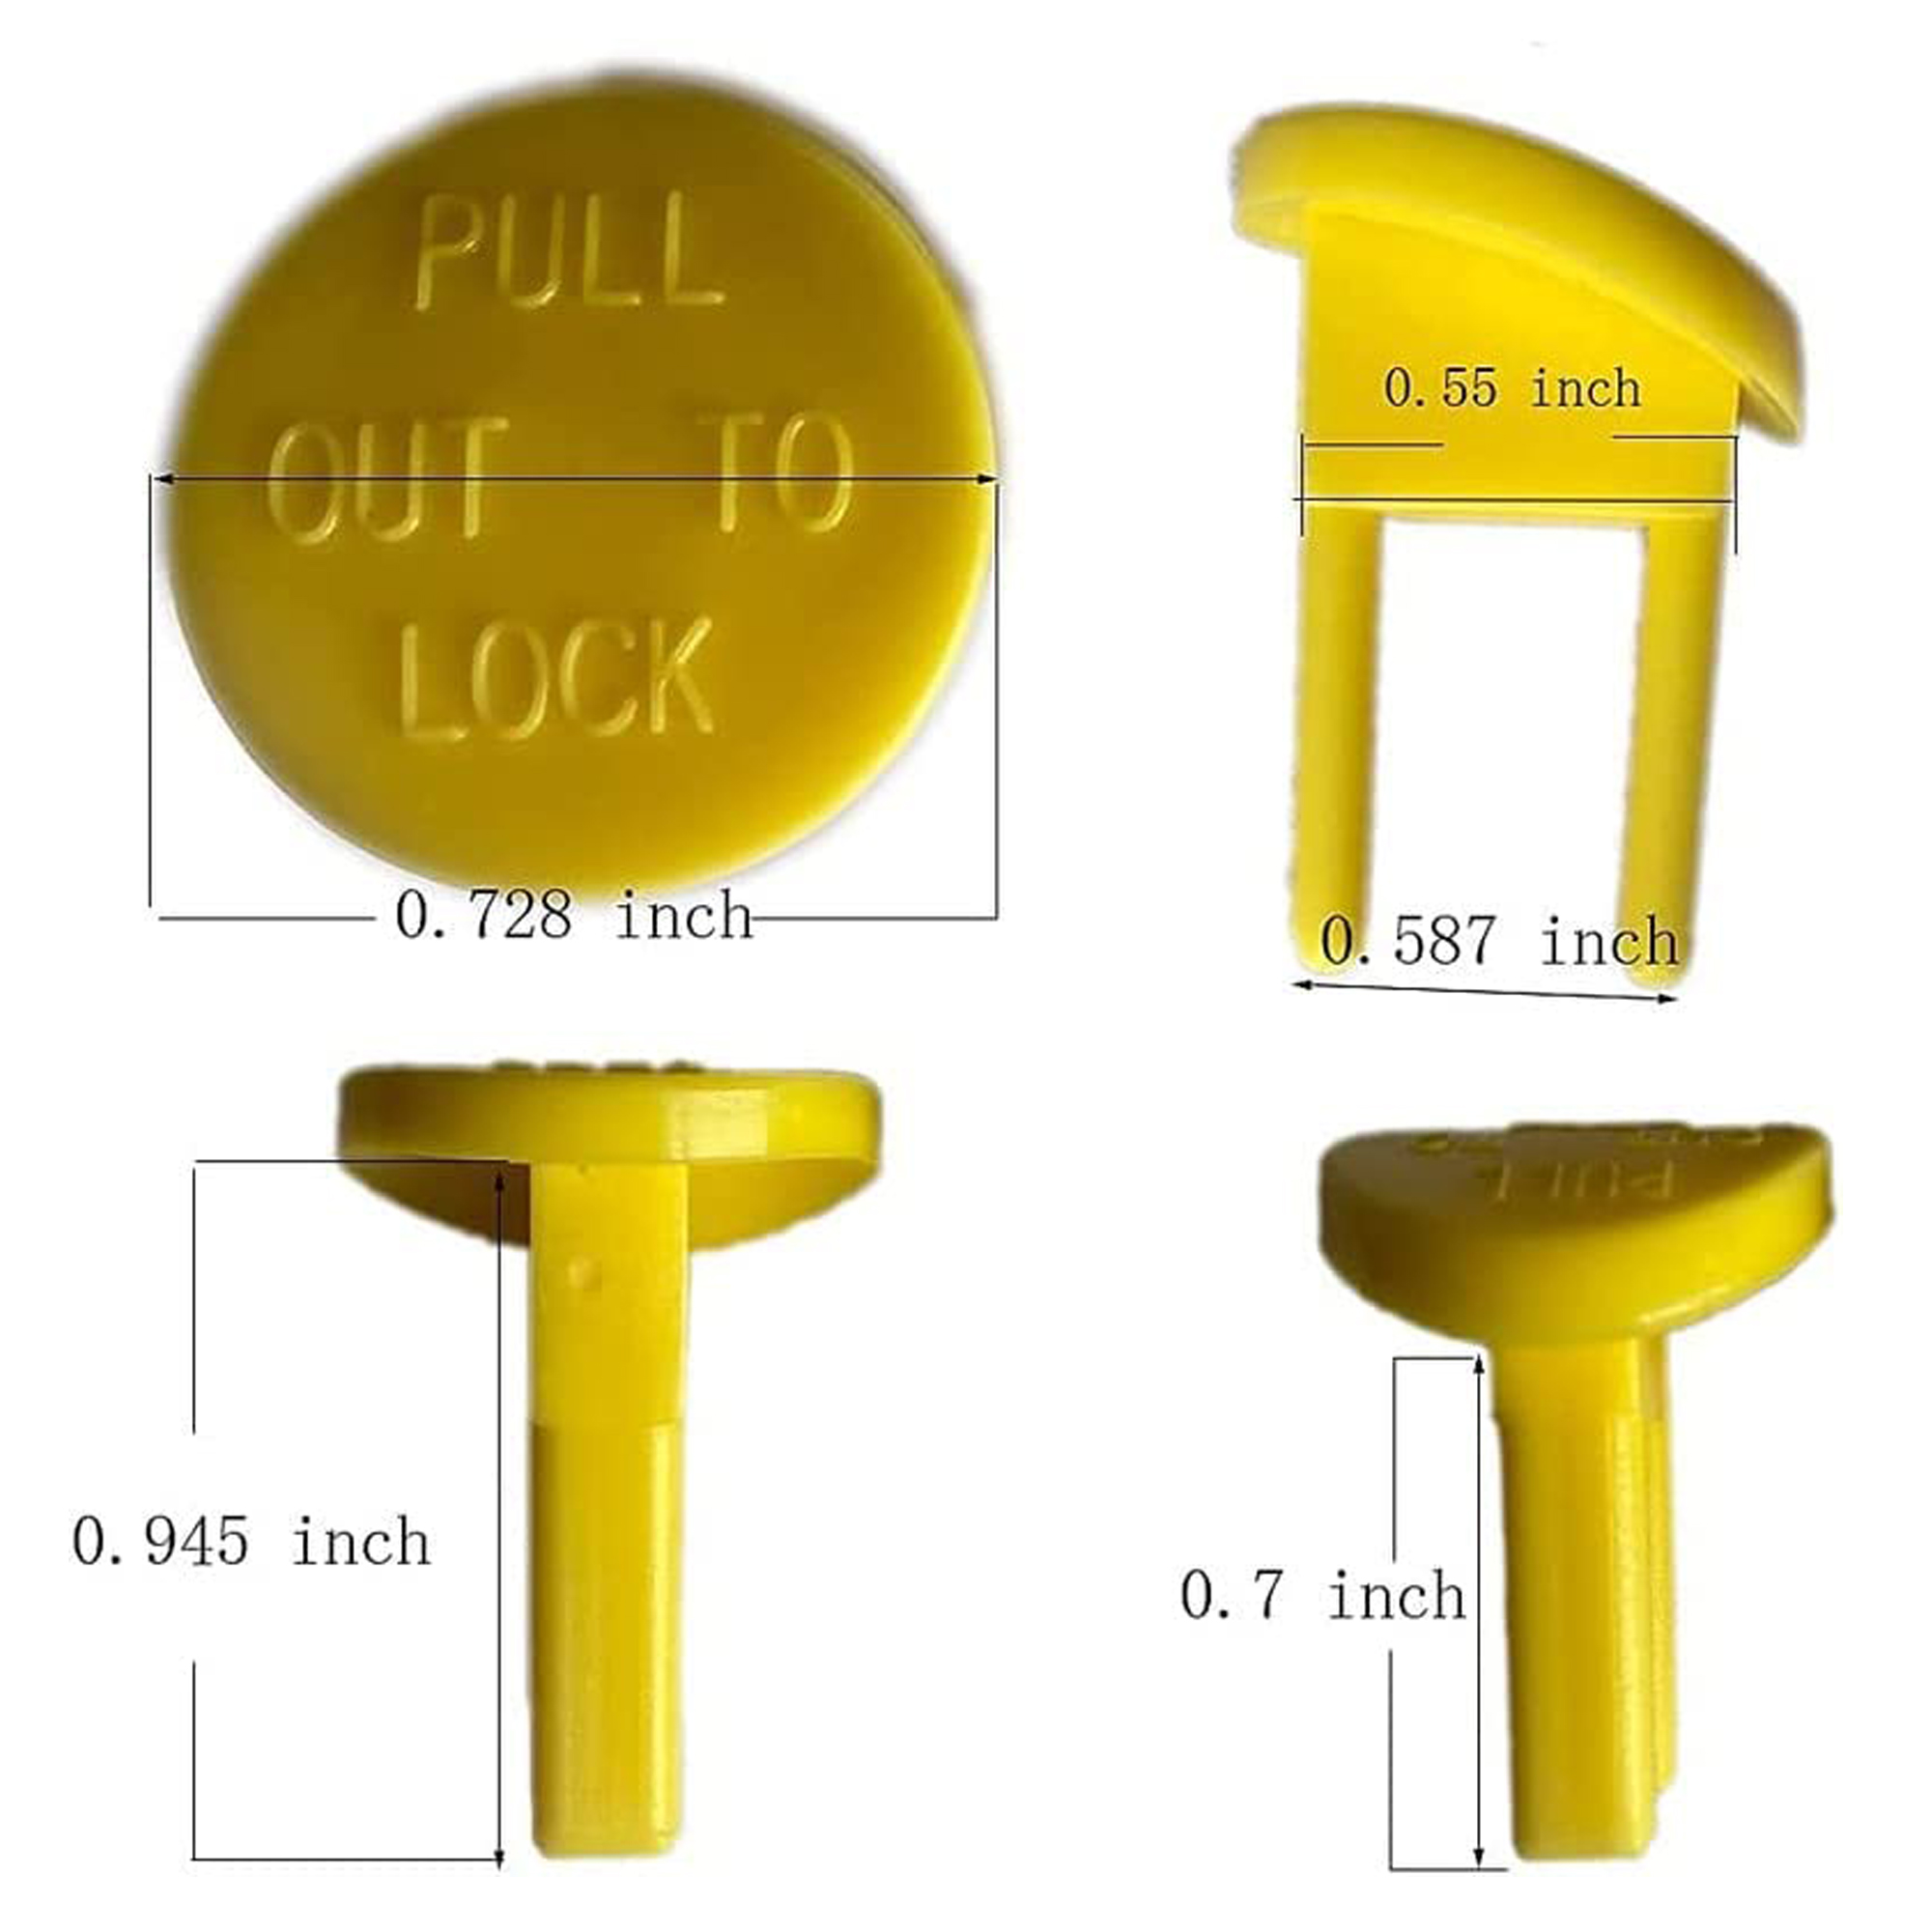 Yellow Safety Switch Key Compatible with Craftsman Radial Arm Jointer Band  Drill Sears Table Saw, Sander, Band Saw, Drill Press Parts- Oval  (1pcs-pack)